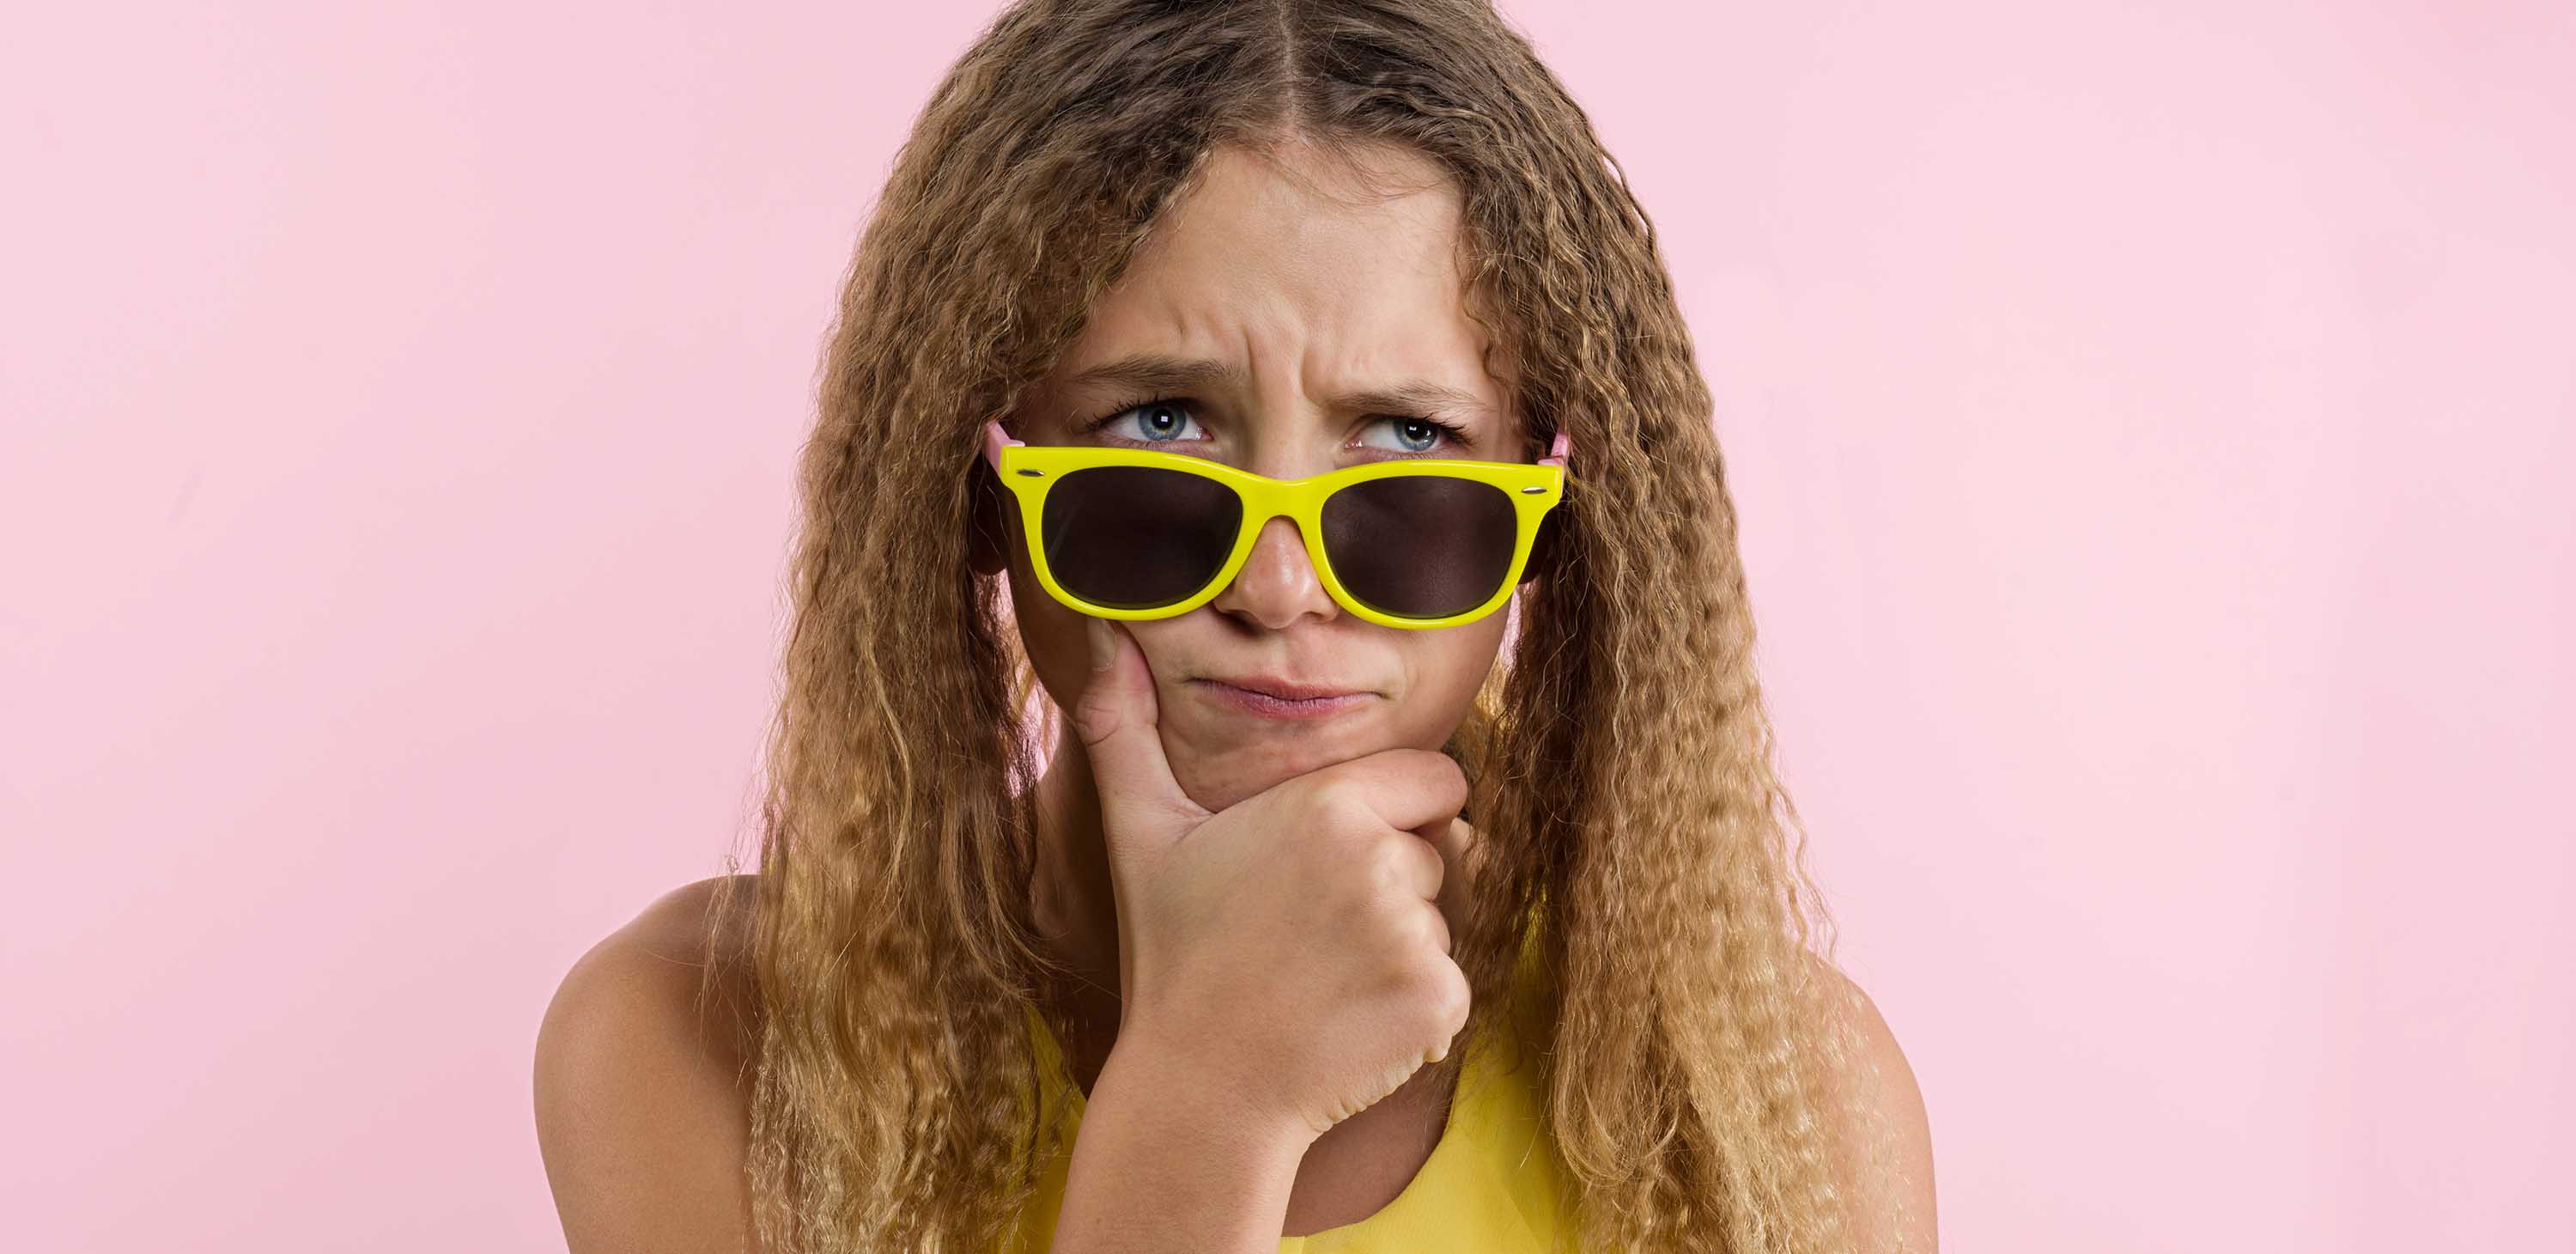 Teenage girl blonde with curly hair frowning, frowning her eyebrow while looking away with placid and thoughtful look. Pensive girl with a puzzled expression on a pink studio background